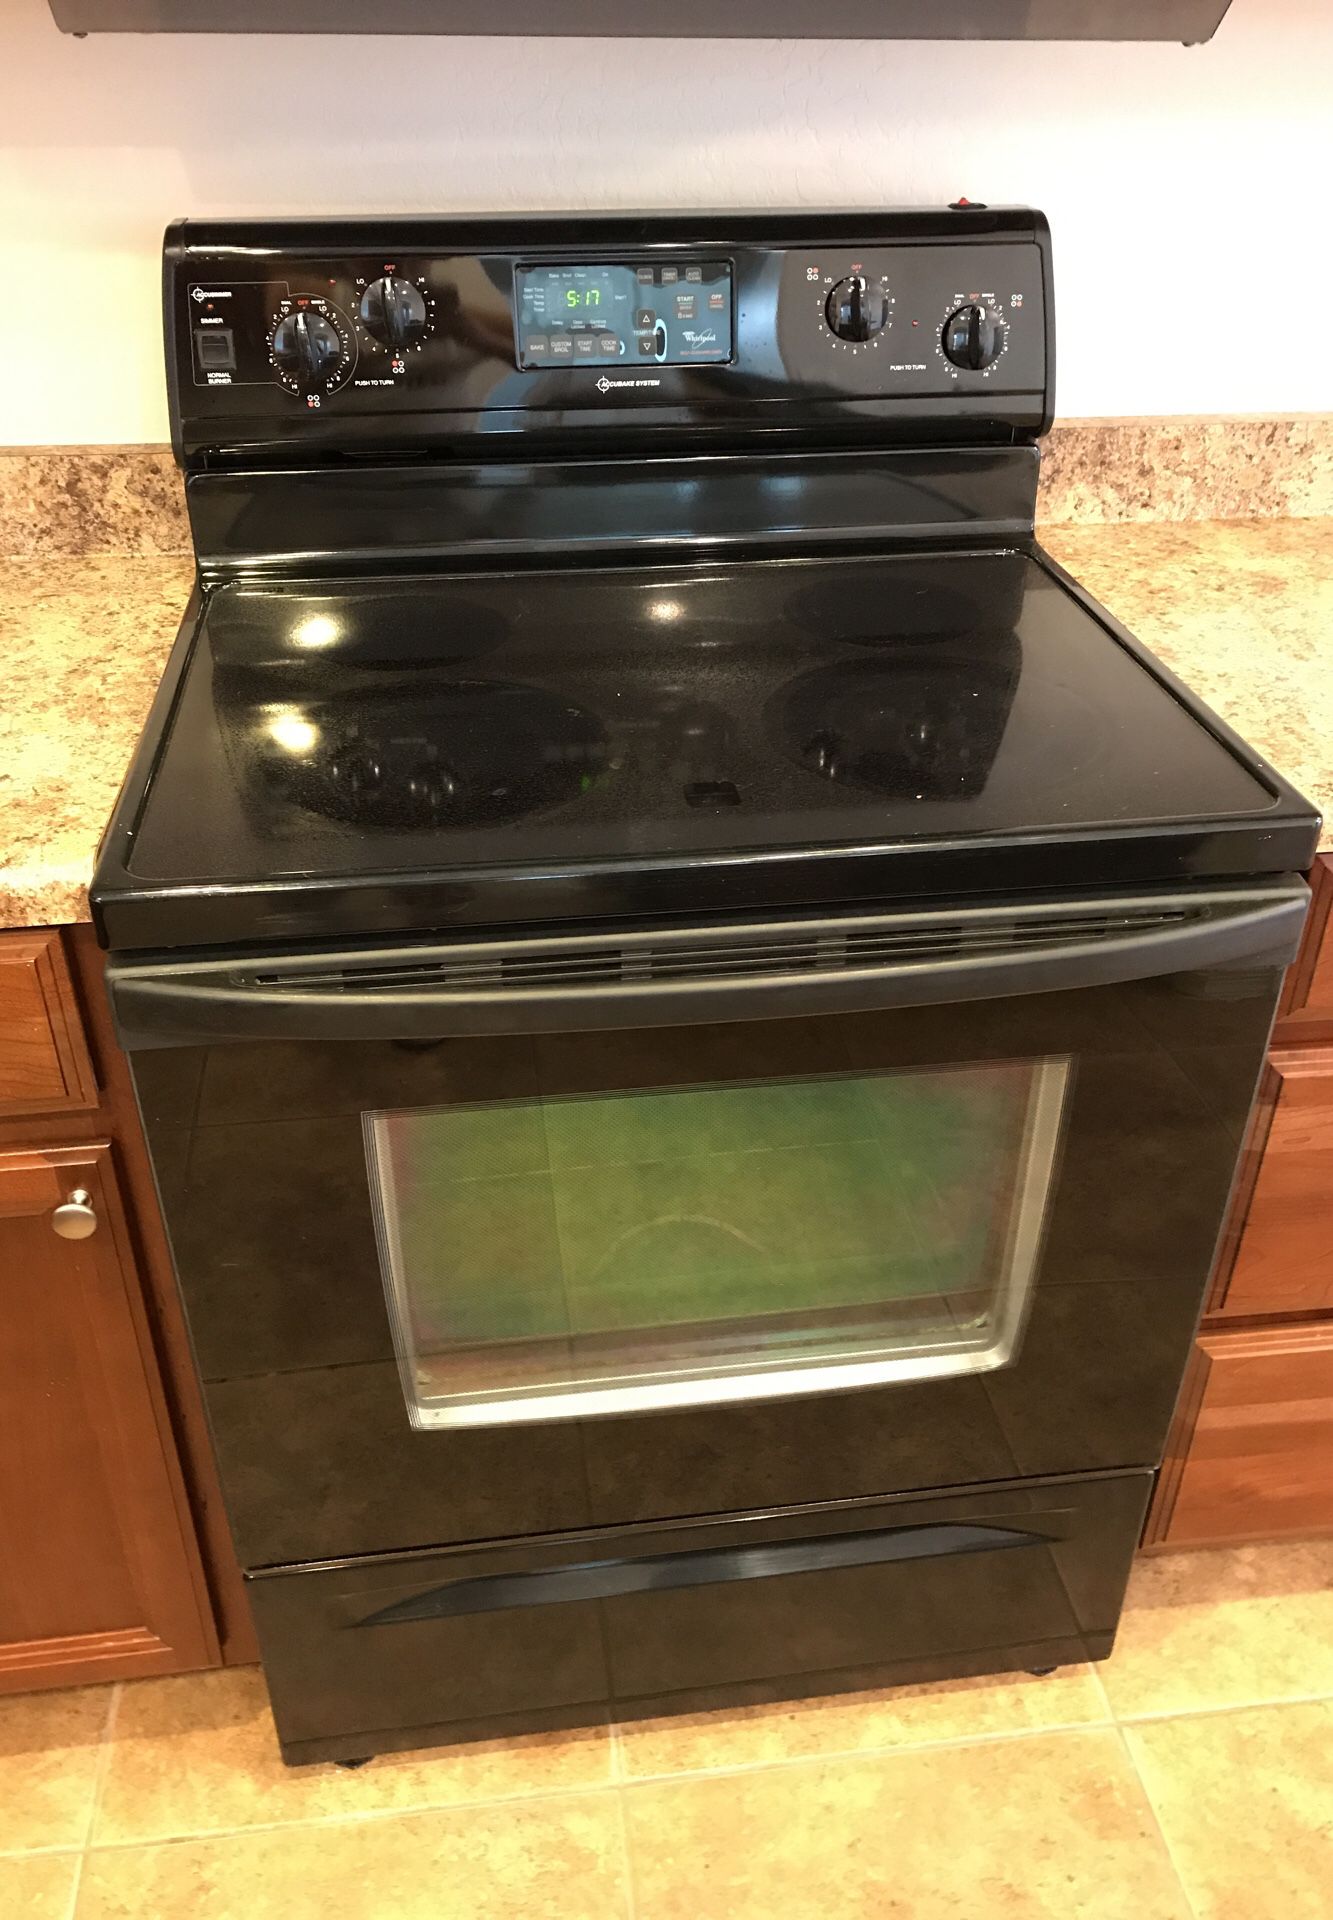 Whirlpool Accubake System Self-Cleaning Oven